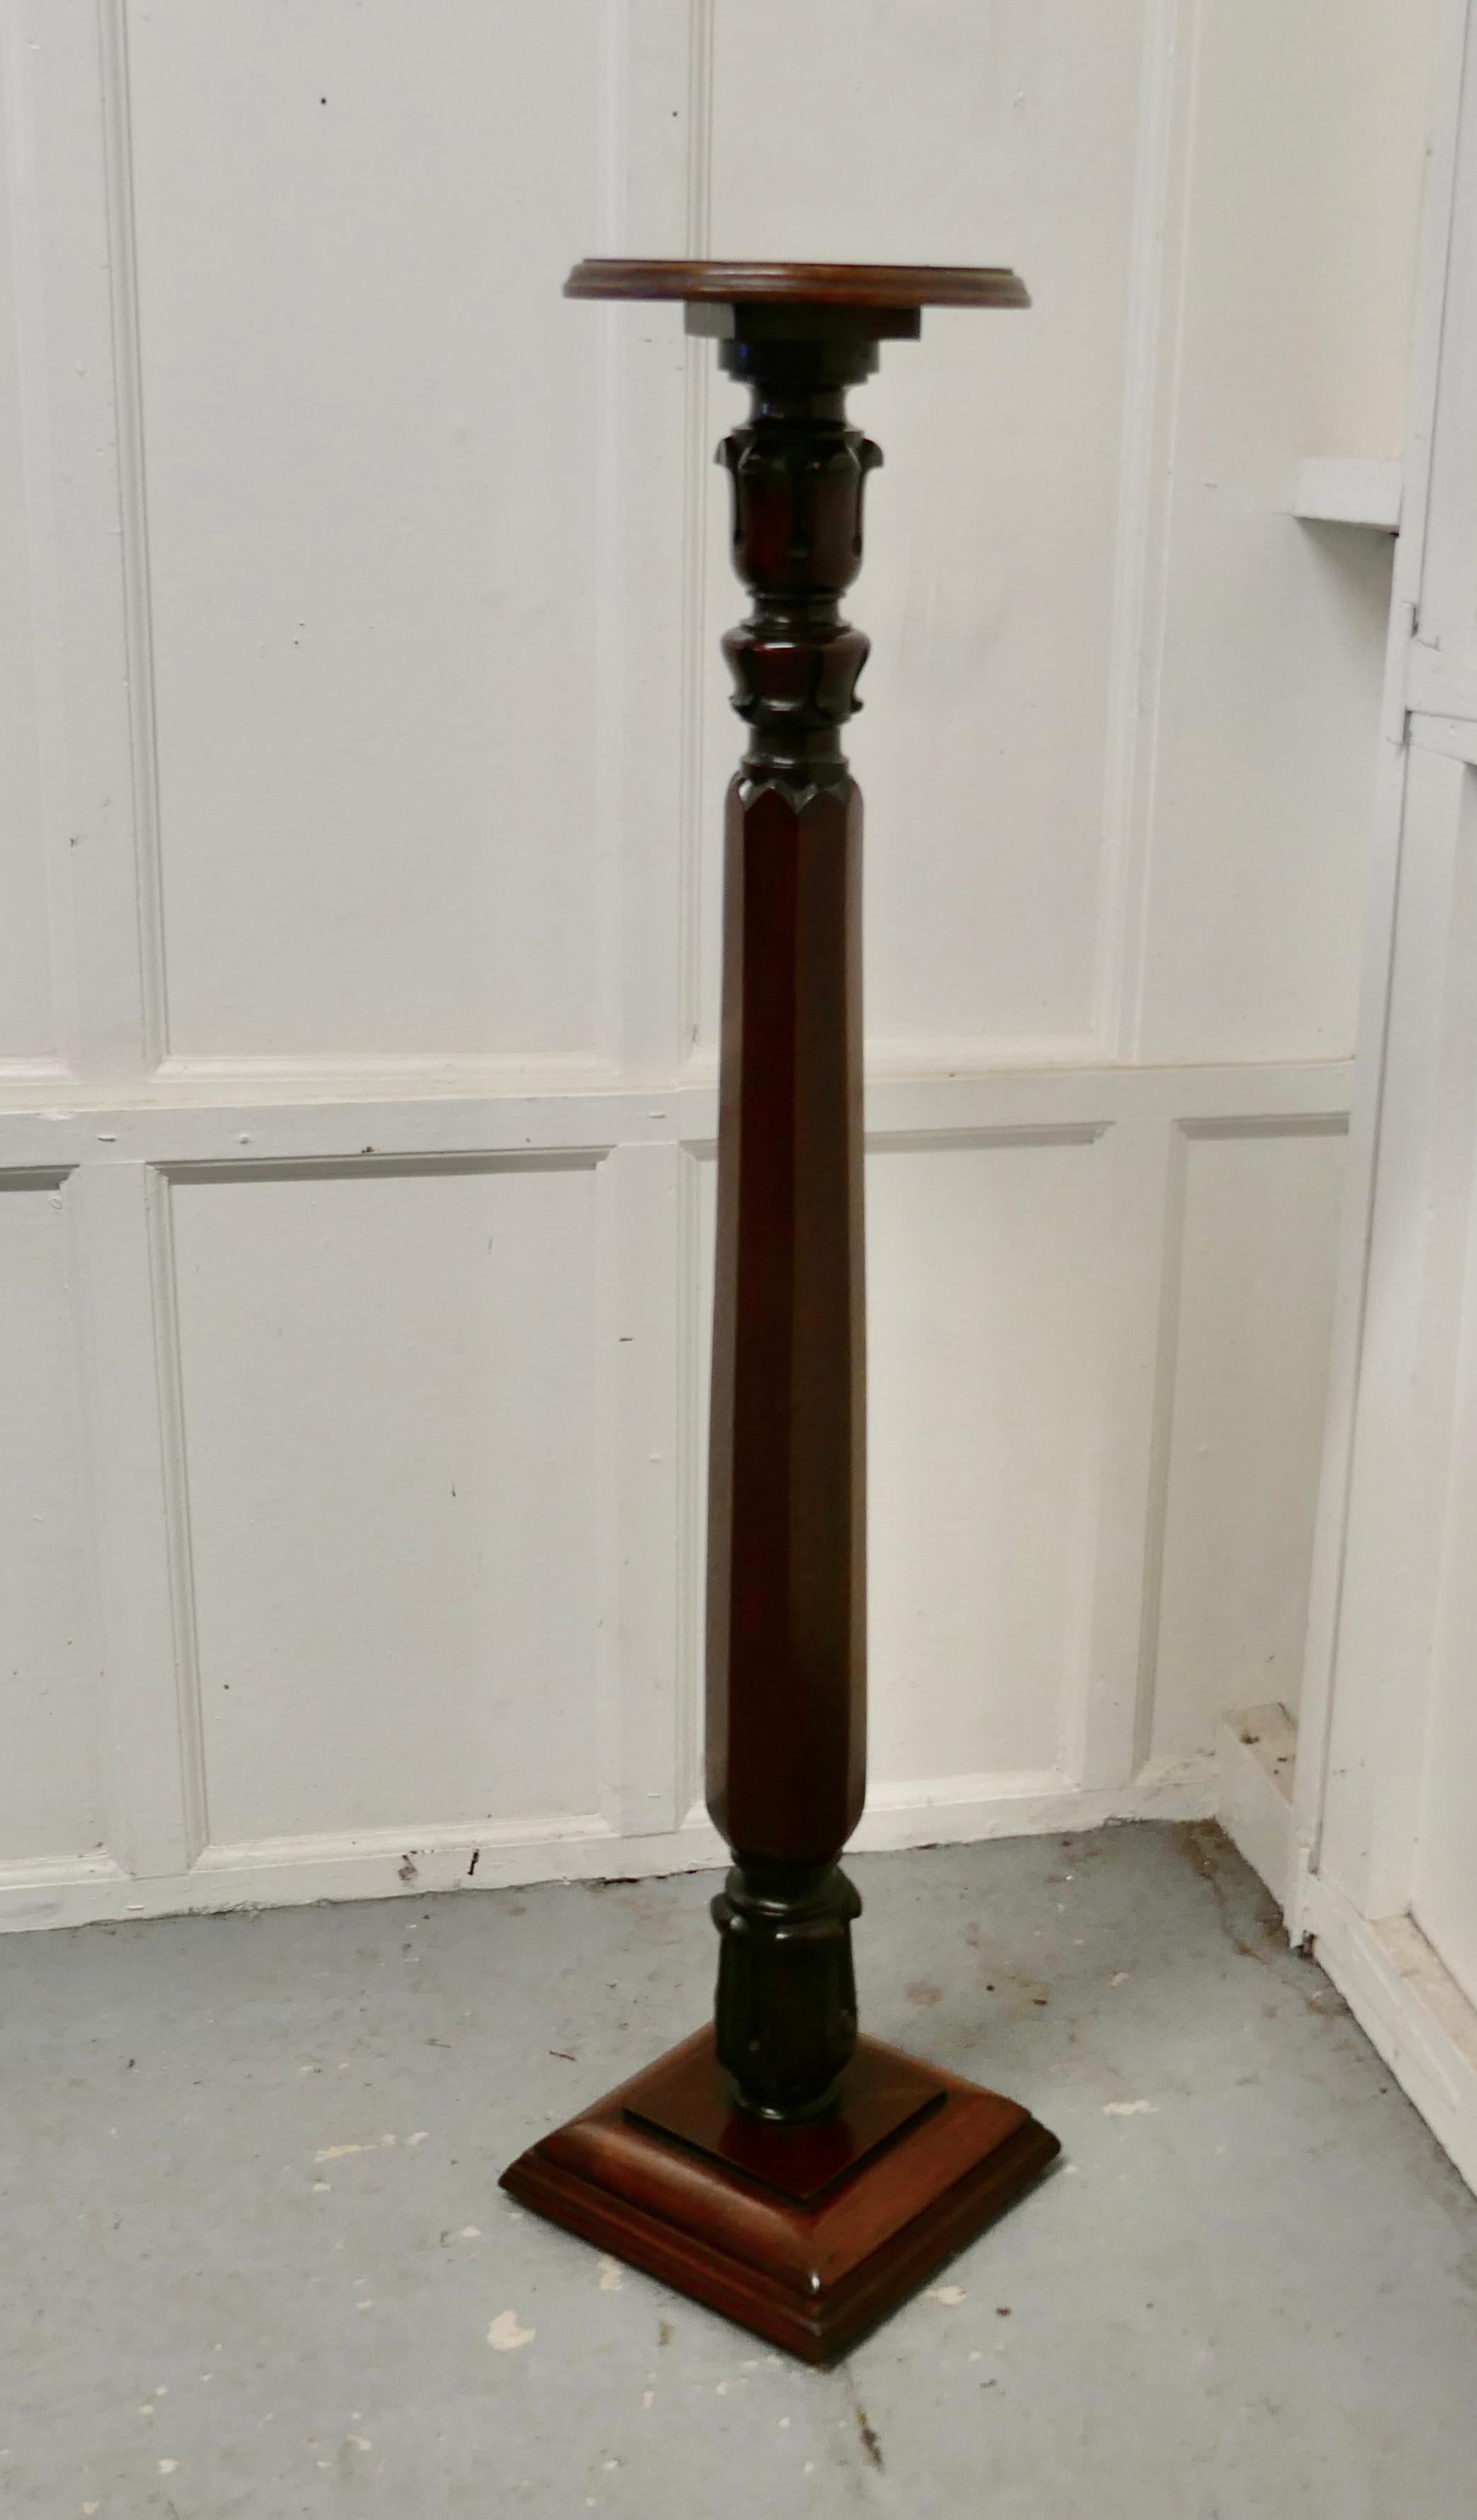 Tall 19th century carved mahogany pedestal

The column has an intricate tulip and acanthus leaf carvings top and bottom with a faceted section between 
The Torchere is very sturdy and decorated in the Classical style with have a multitude of uses